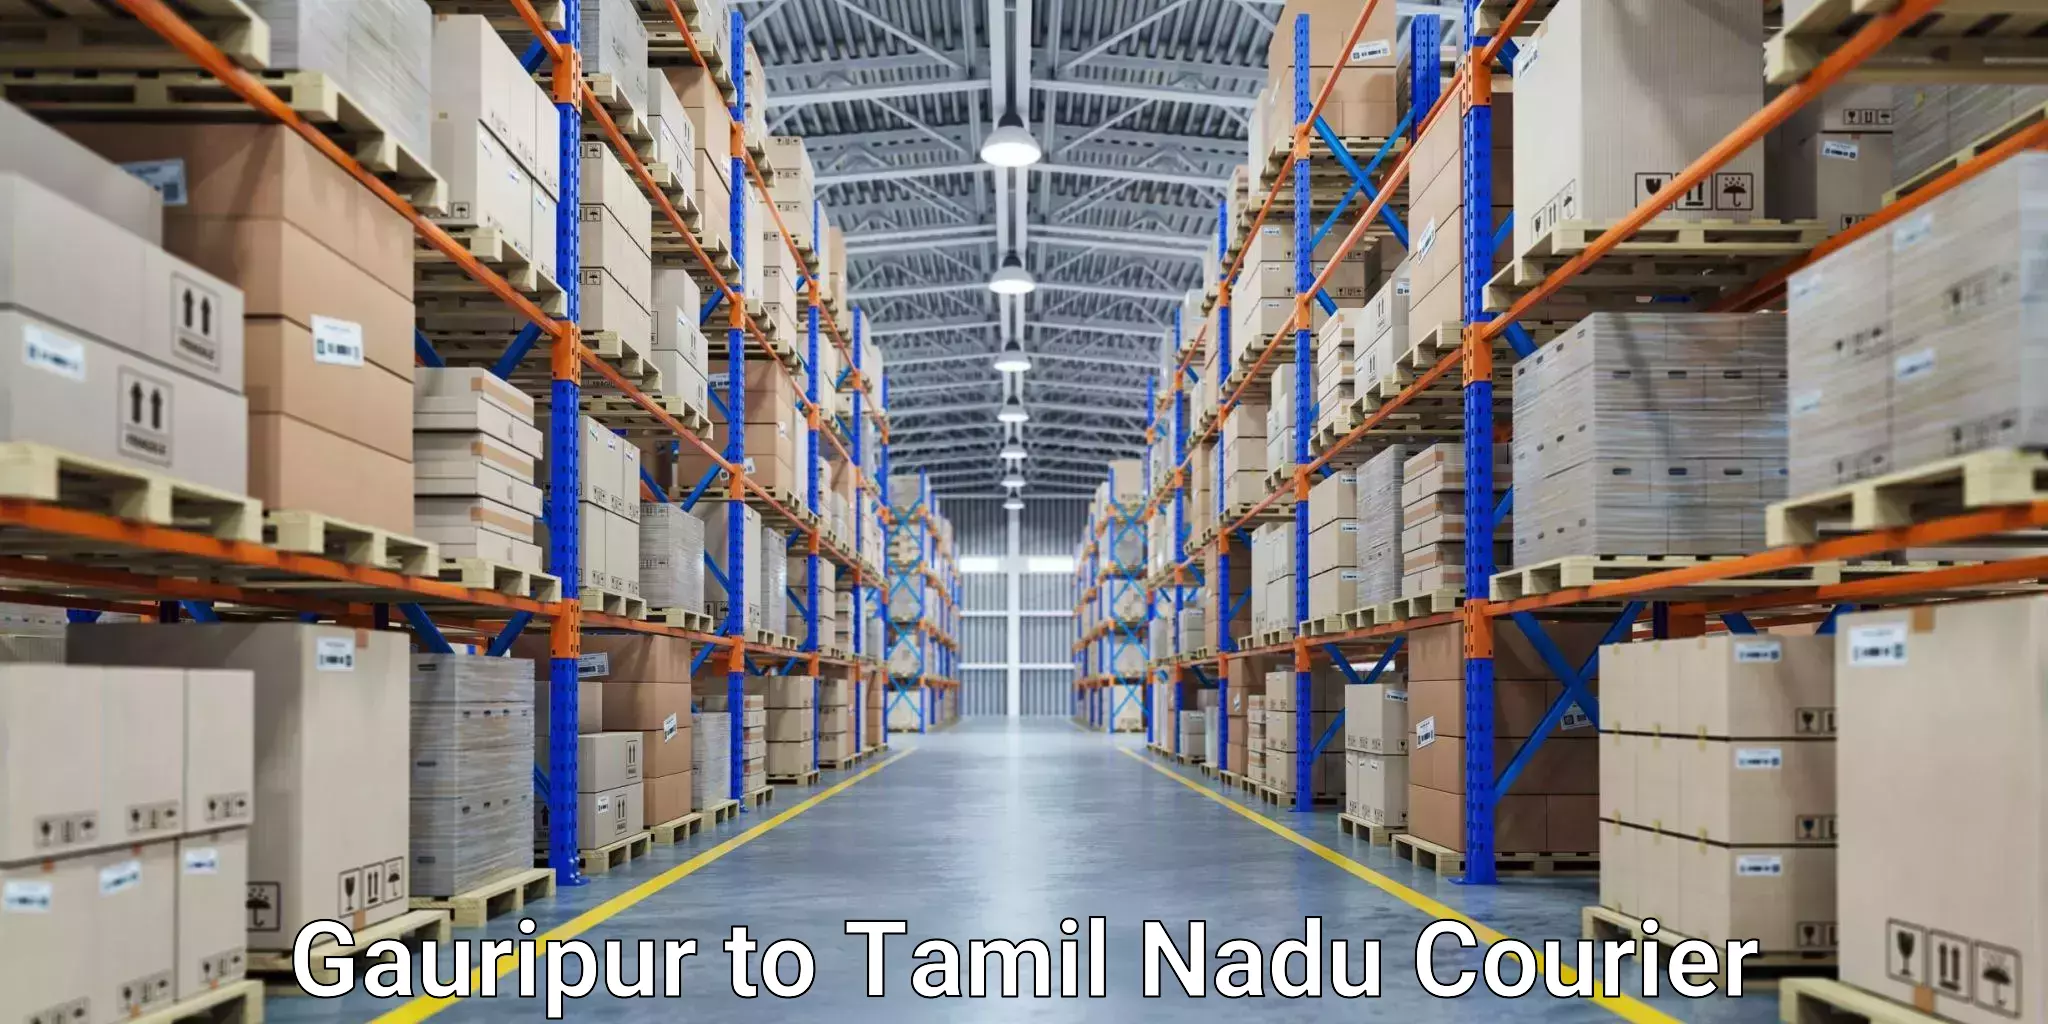 Fast delivery service Gauripur to Tuticorin Port